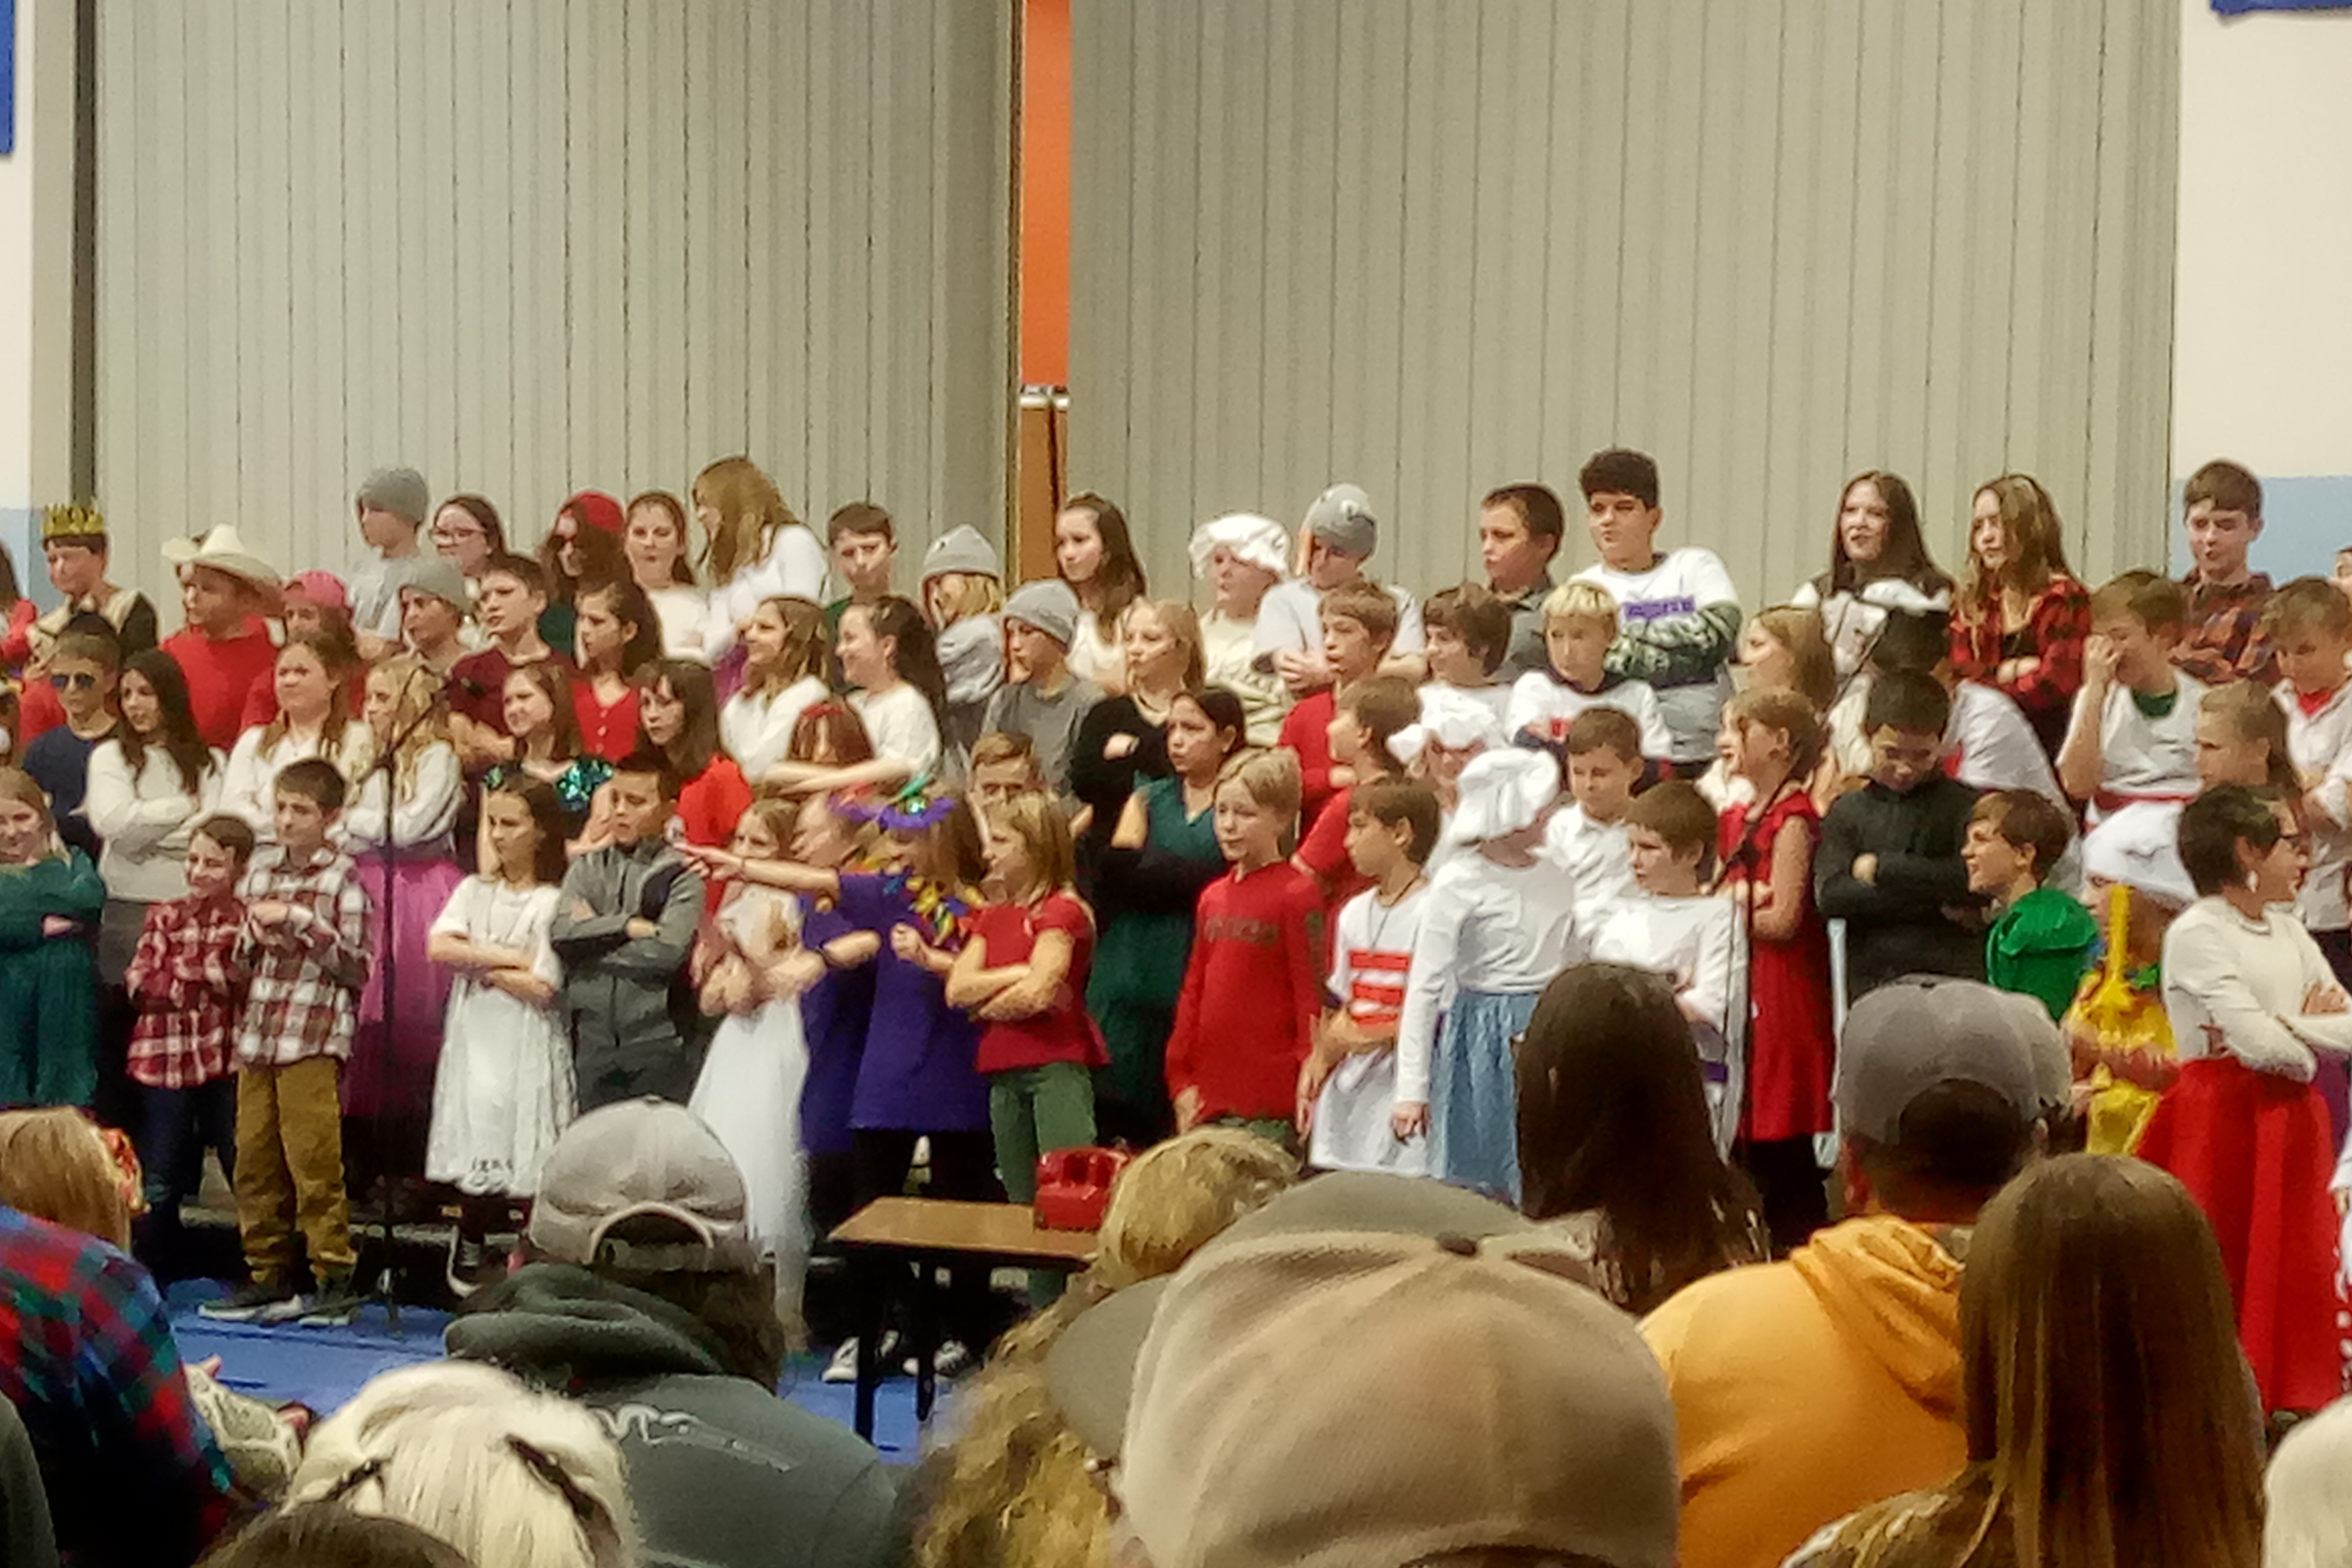 The 4th and 5th grade sing the 12 days of Crhistmas